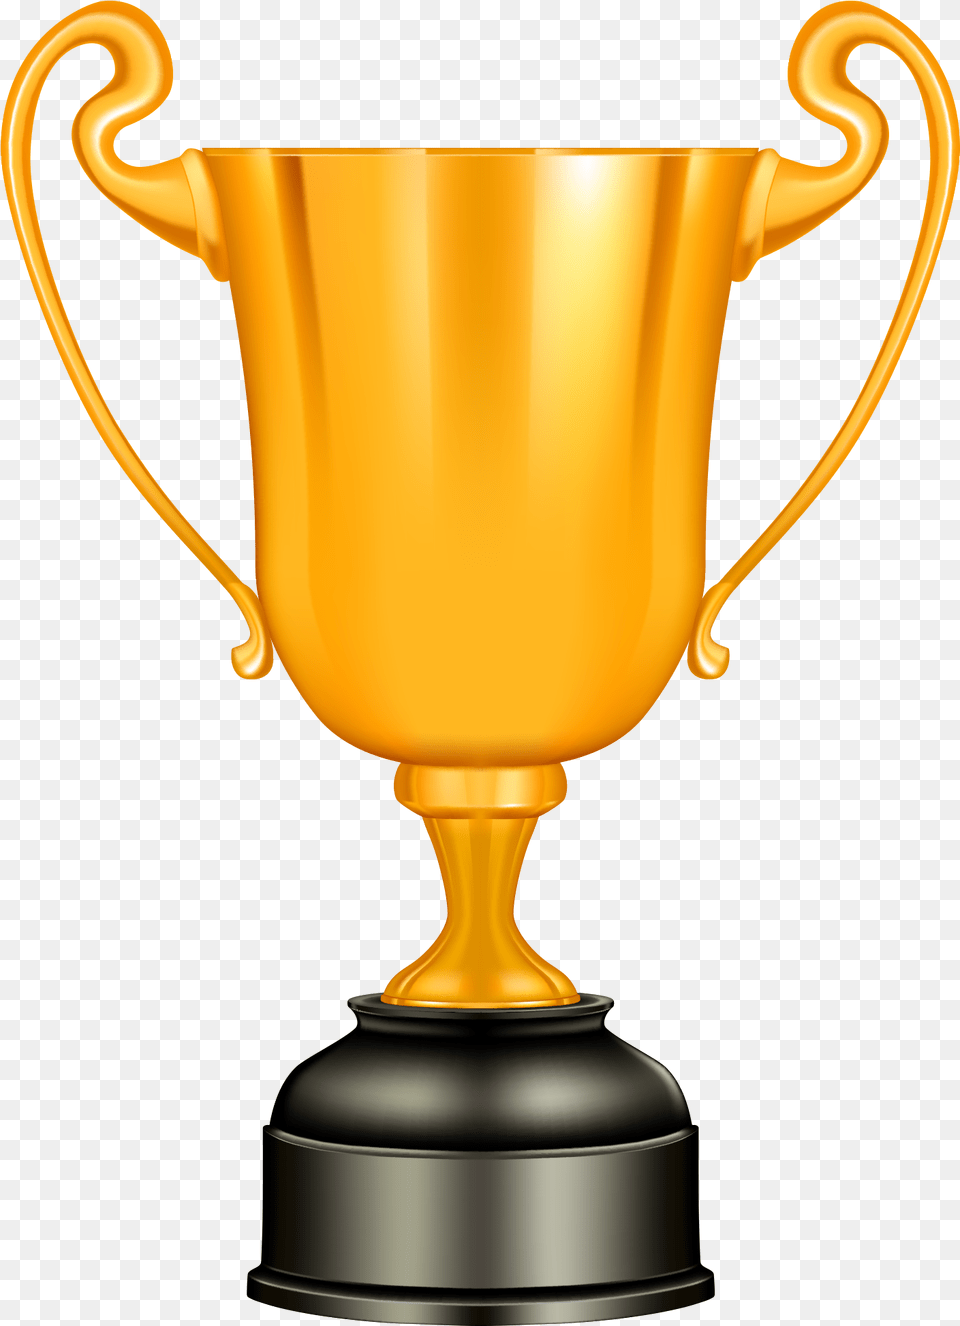 Transparent Award Trophy Clipart Silver Trophy Vector, Smoke Pipe Free Png Download